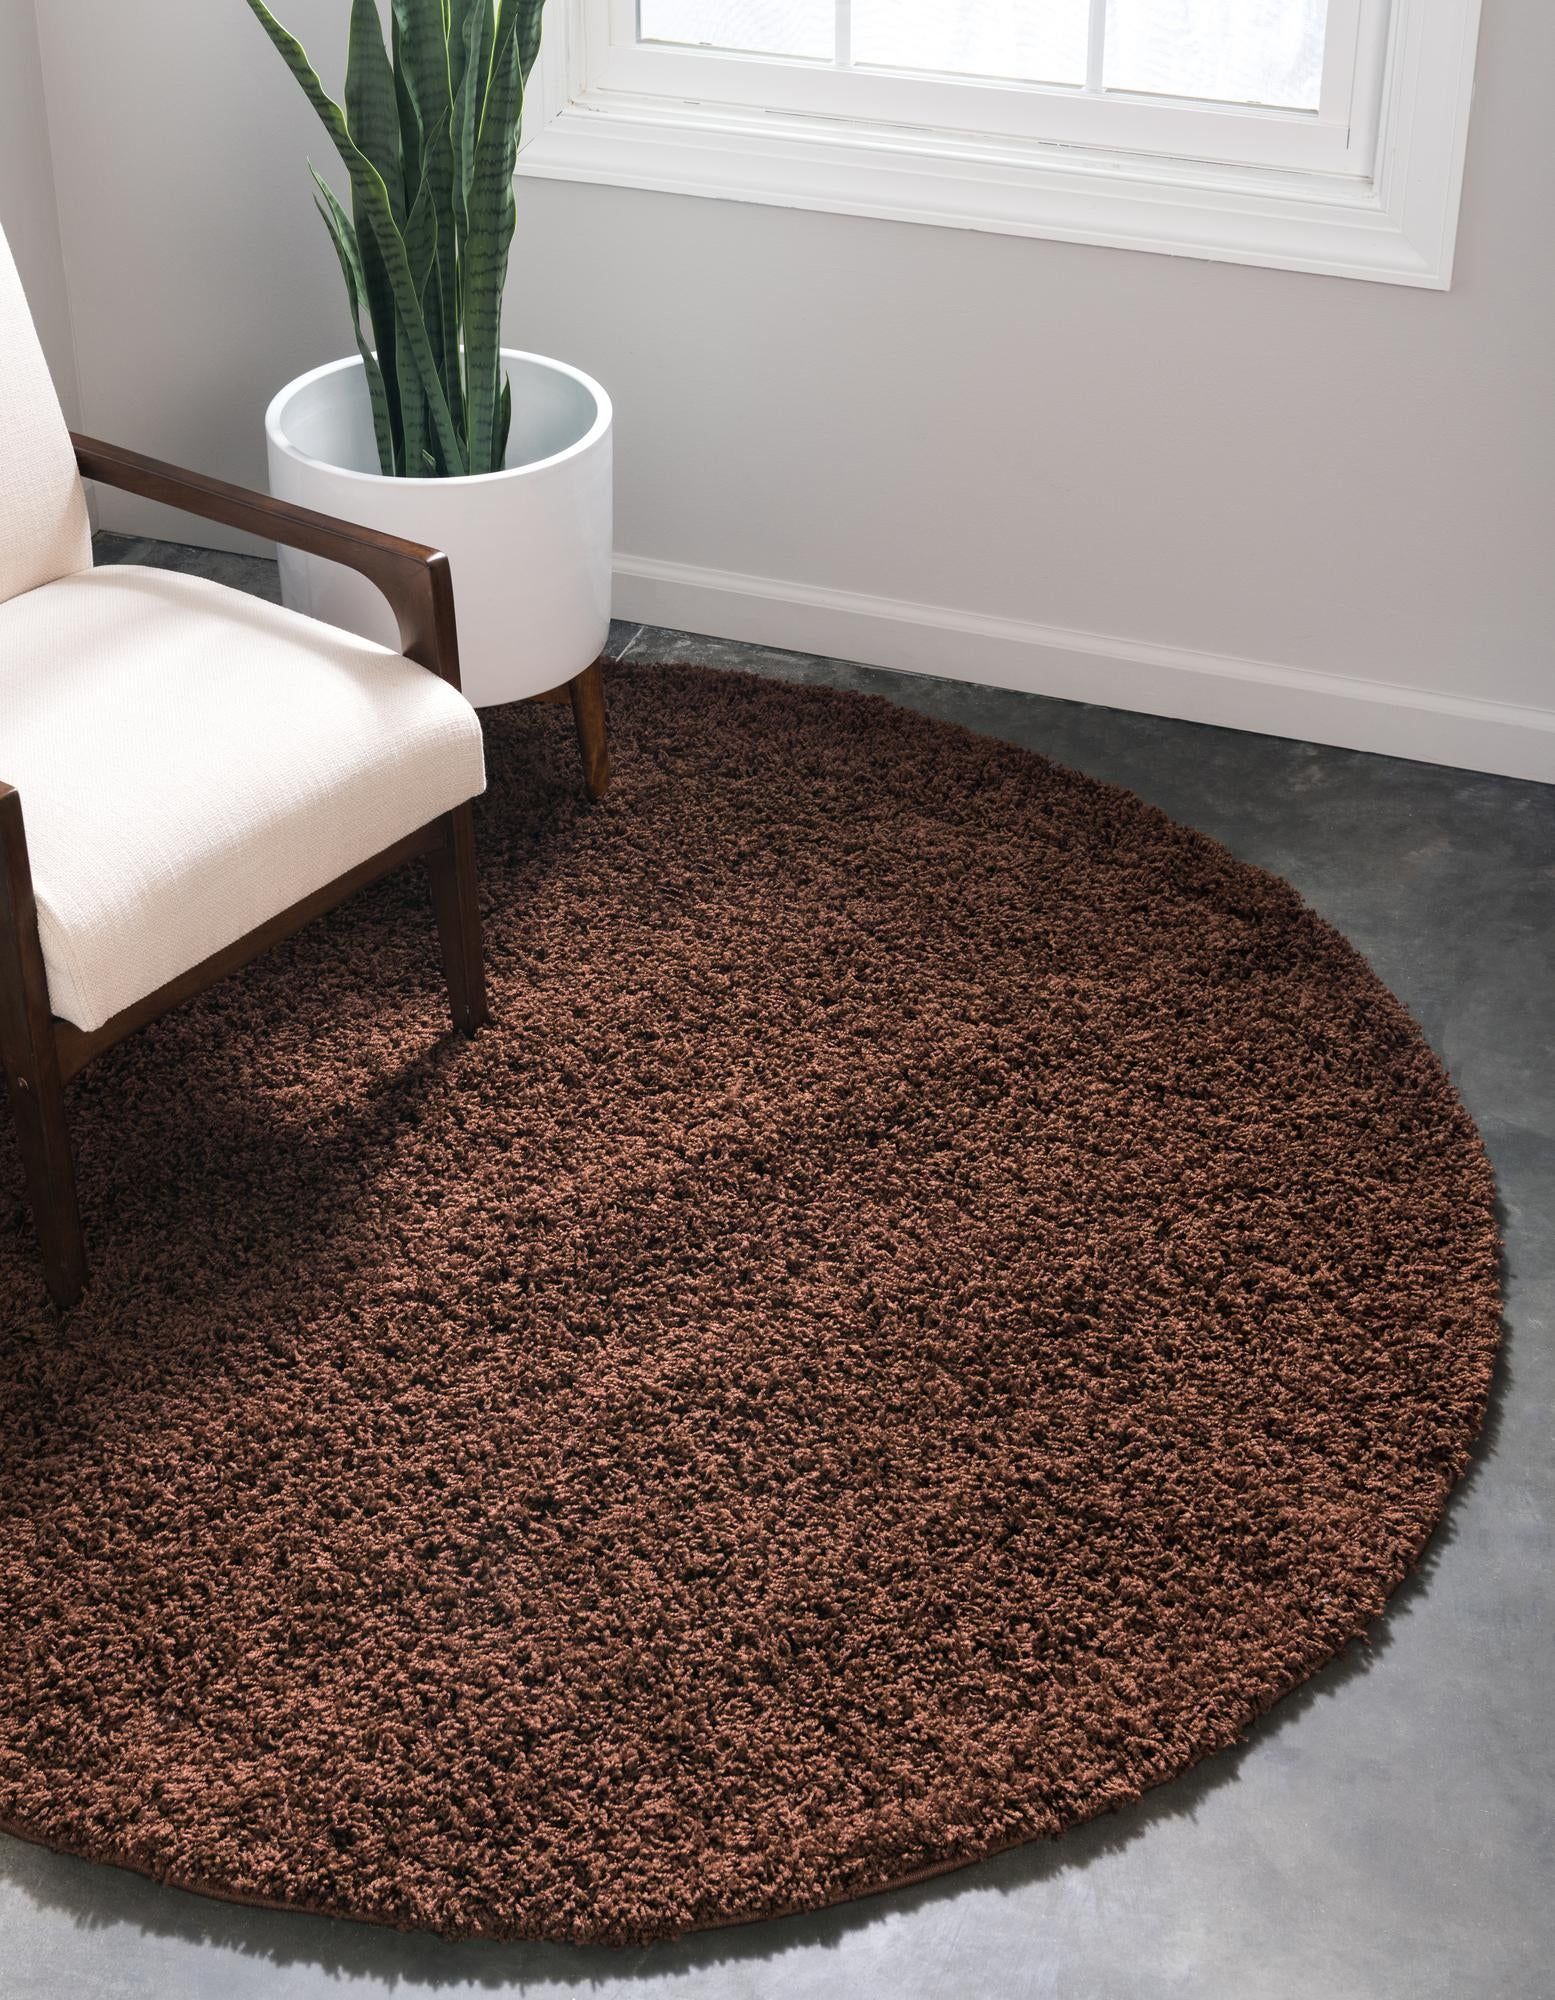 Chocolate Brown 4' X 4' Solid Shag Round Rug | Handknotted For Solid Shag Round Rugs (Photo 13 of 15)